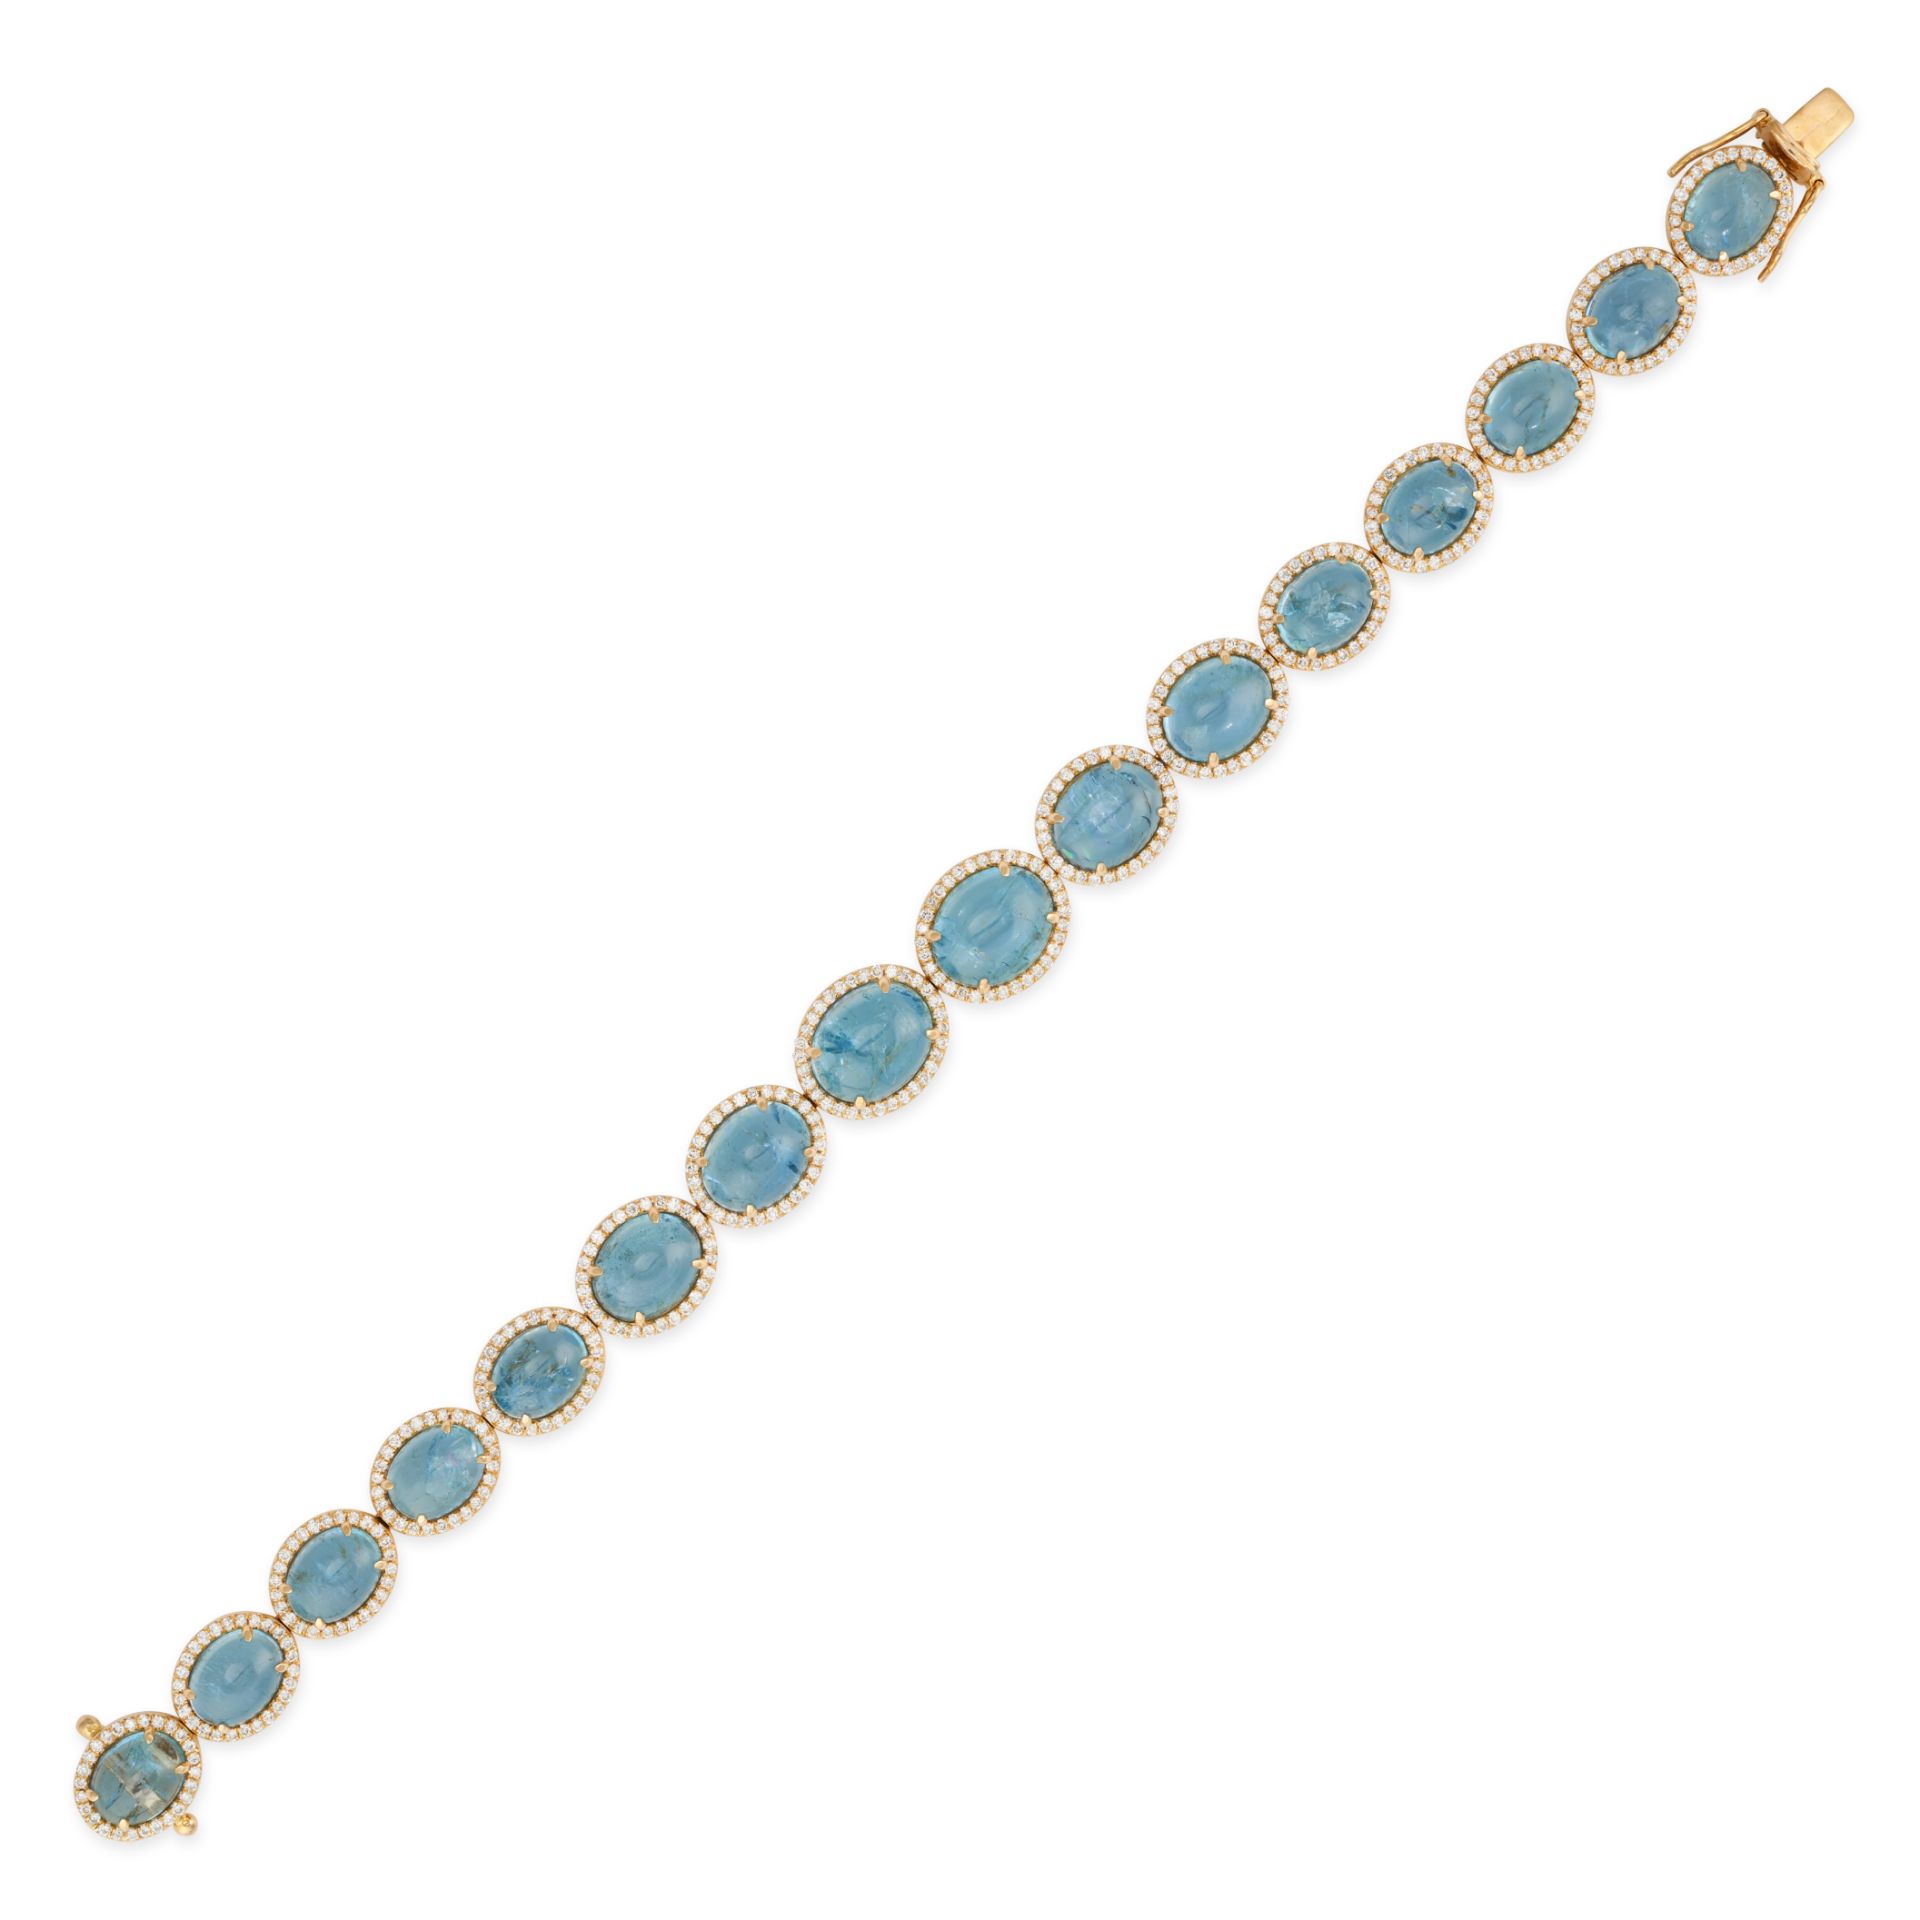 AN AQUAMARINE AND DIAMOND BRACELET set with a row of of oval cabochon aquamarines in orders of ro...